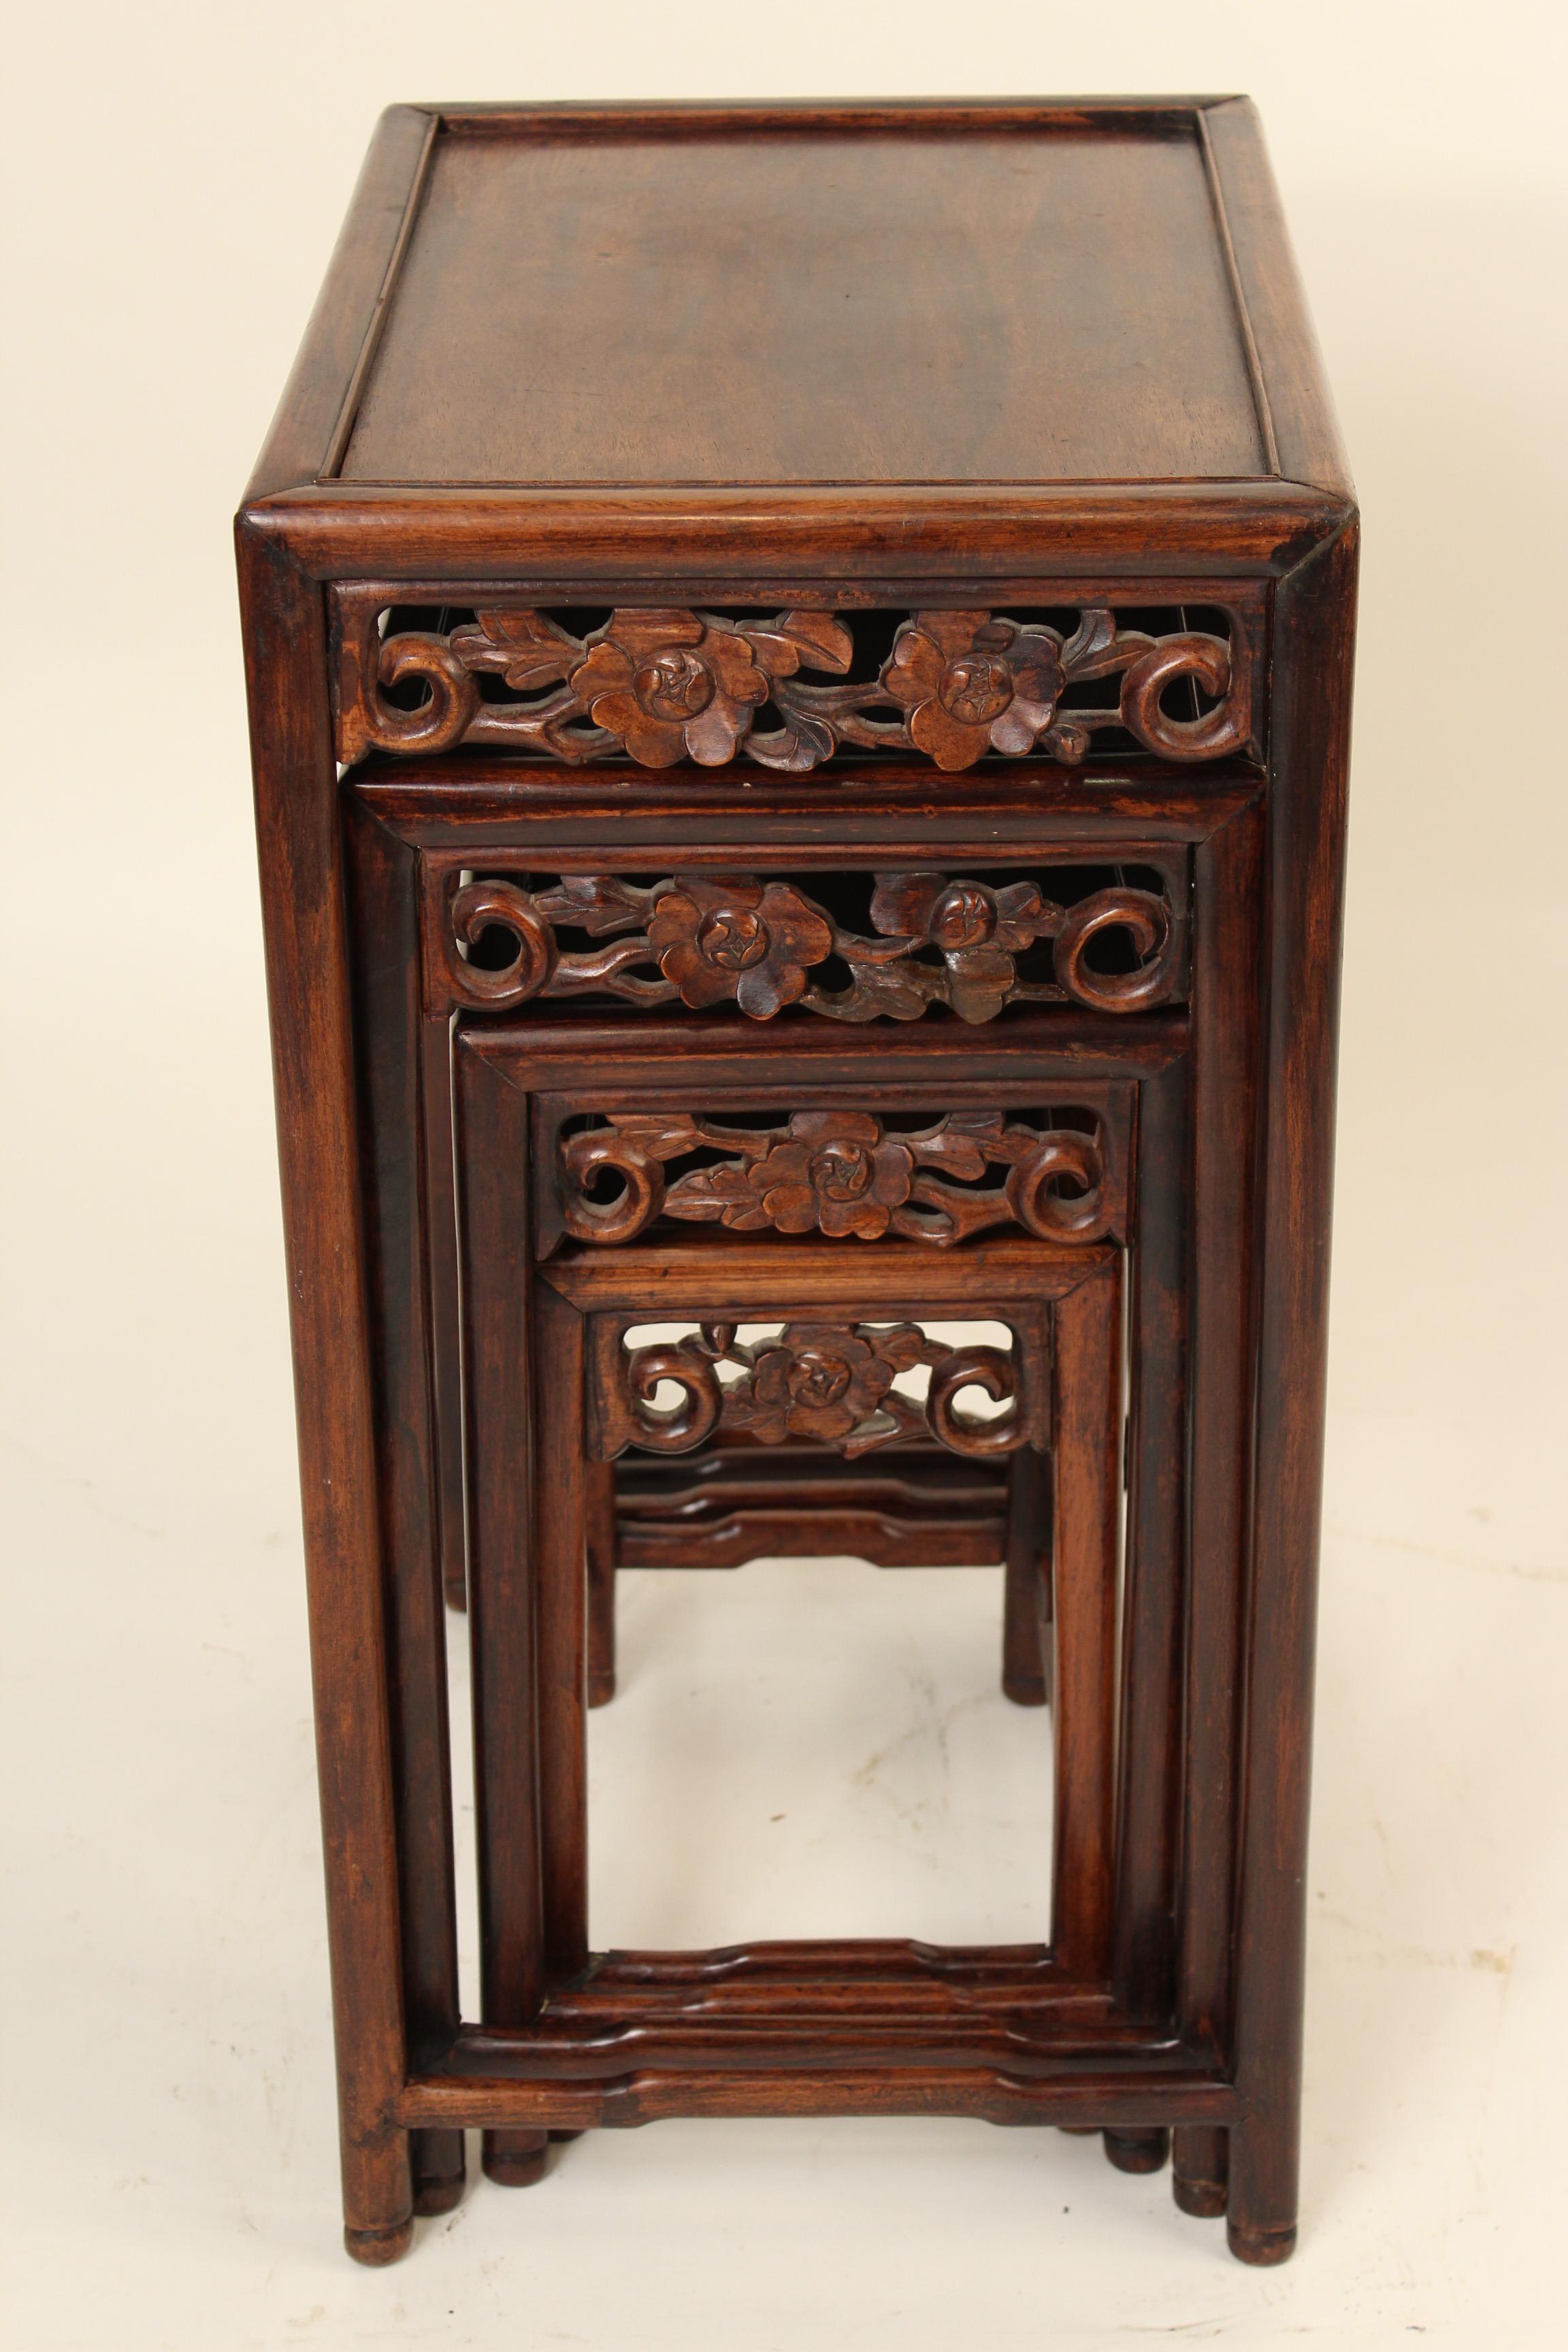 Chinese Export Nest of Four Chinese Teak Wood Tables